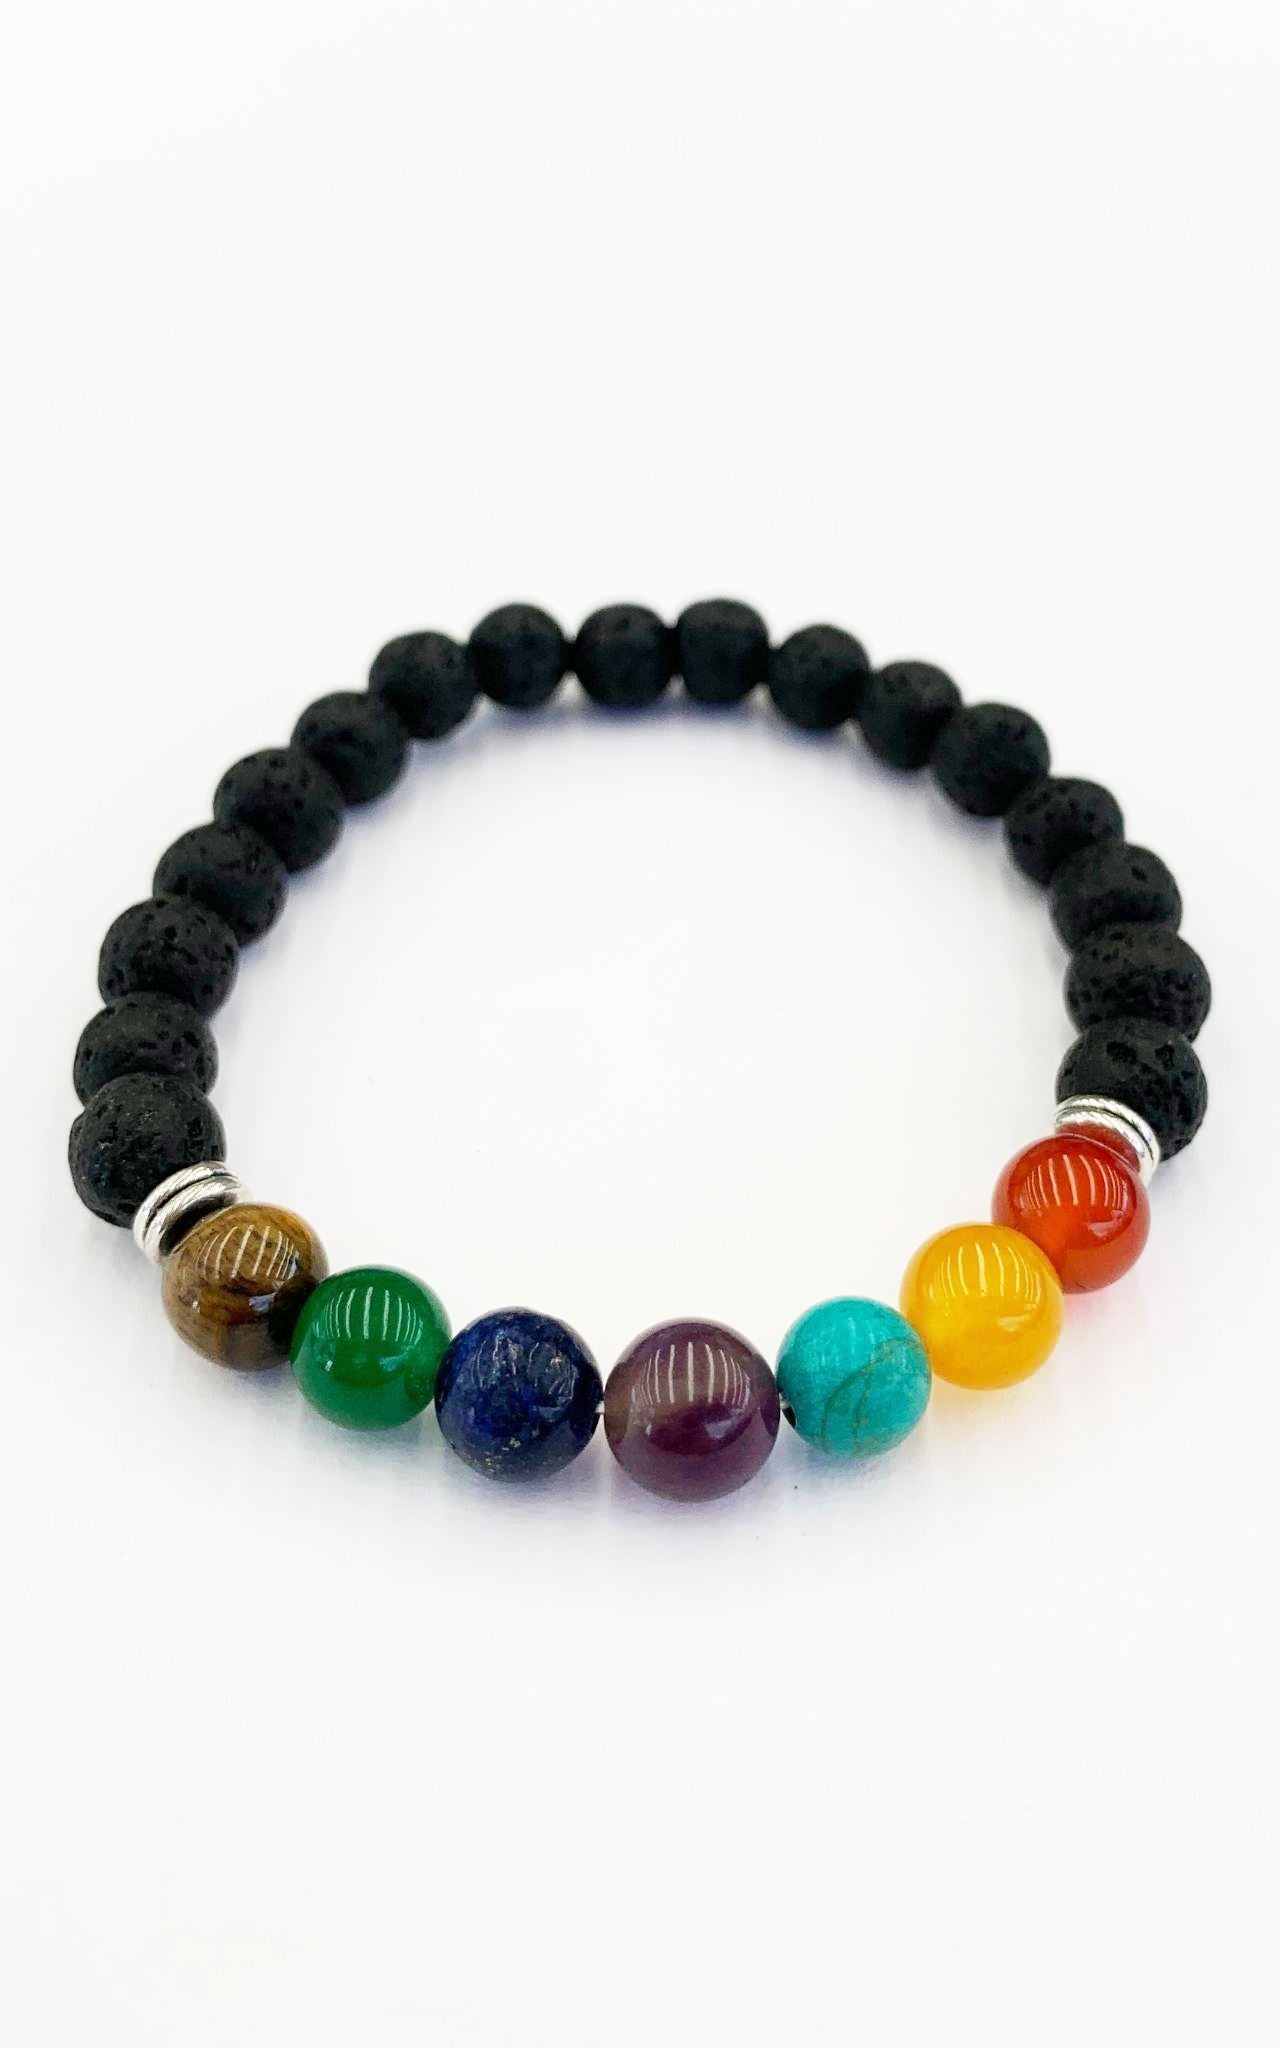 Chakra Healing Bracelet with Lava Stones - 8mm - Earth Inspired Gifts